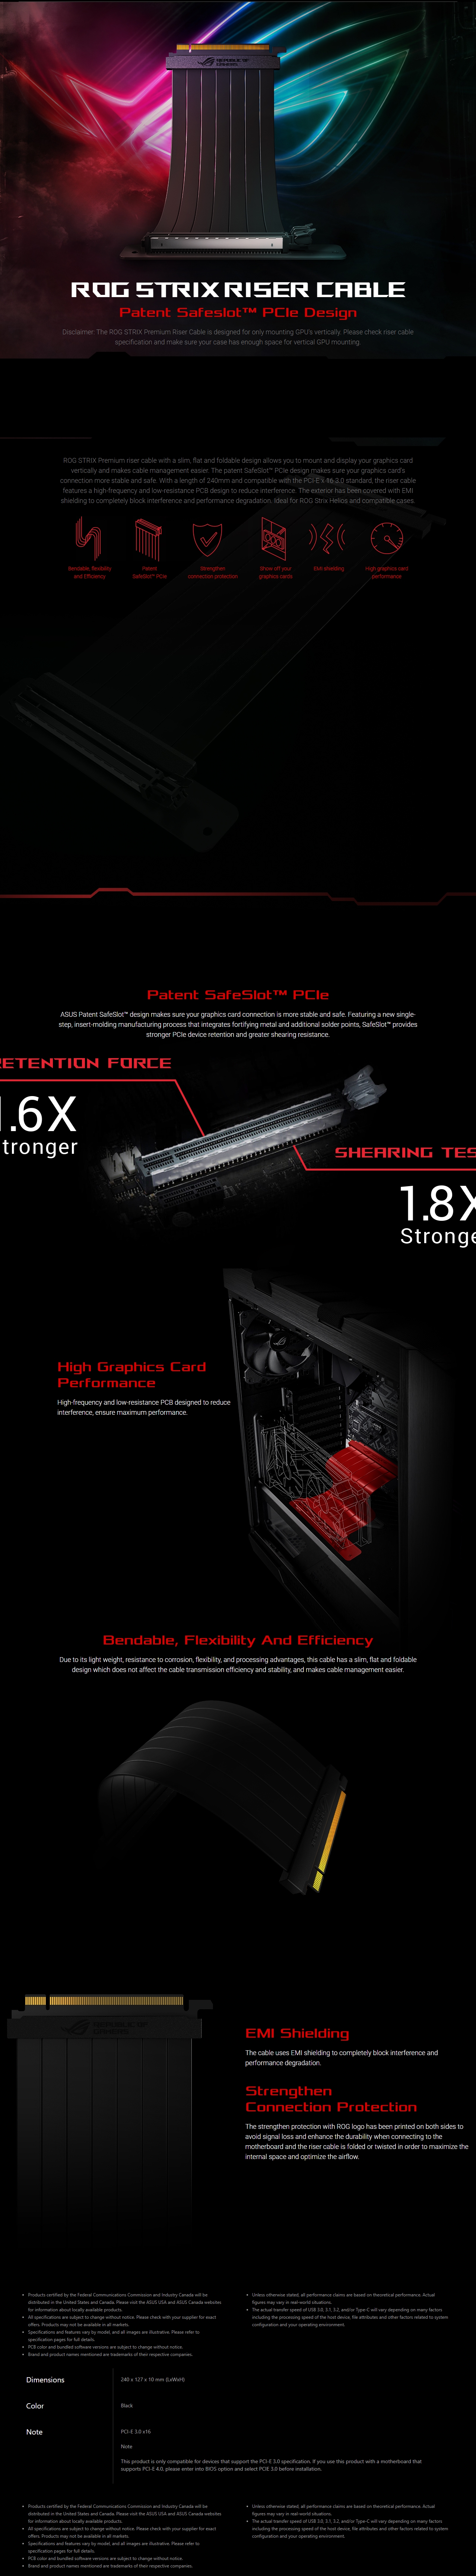 A large marketing image providing additional information about the product ASUS ROG Strix PCI Express 3.0 x16 Riser Cable - Additional alt info not provided